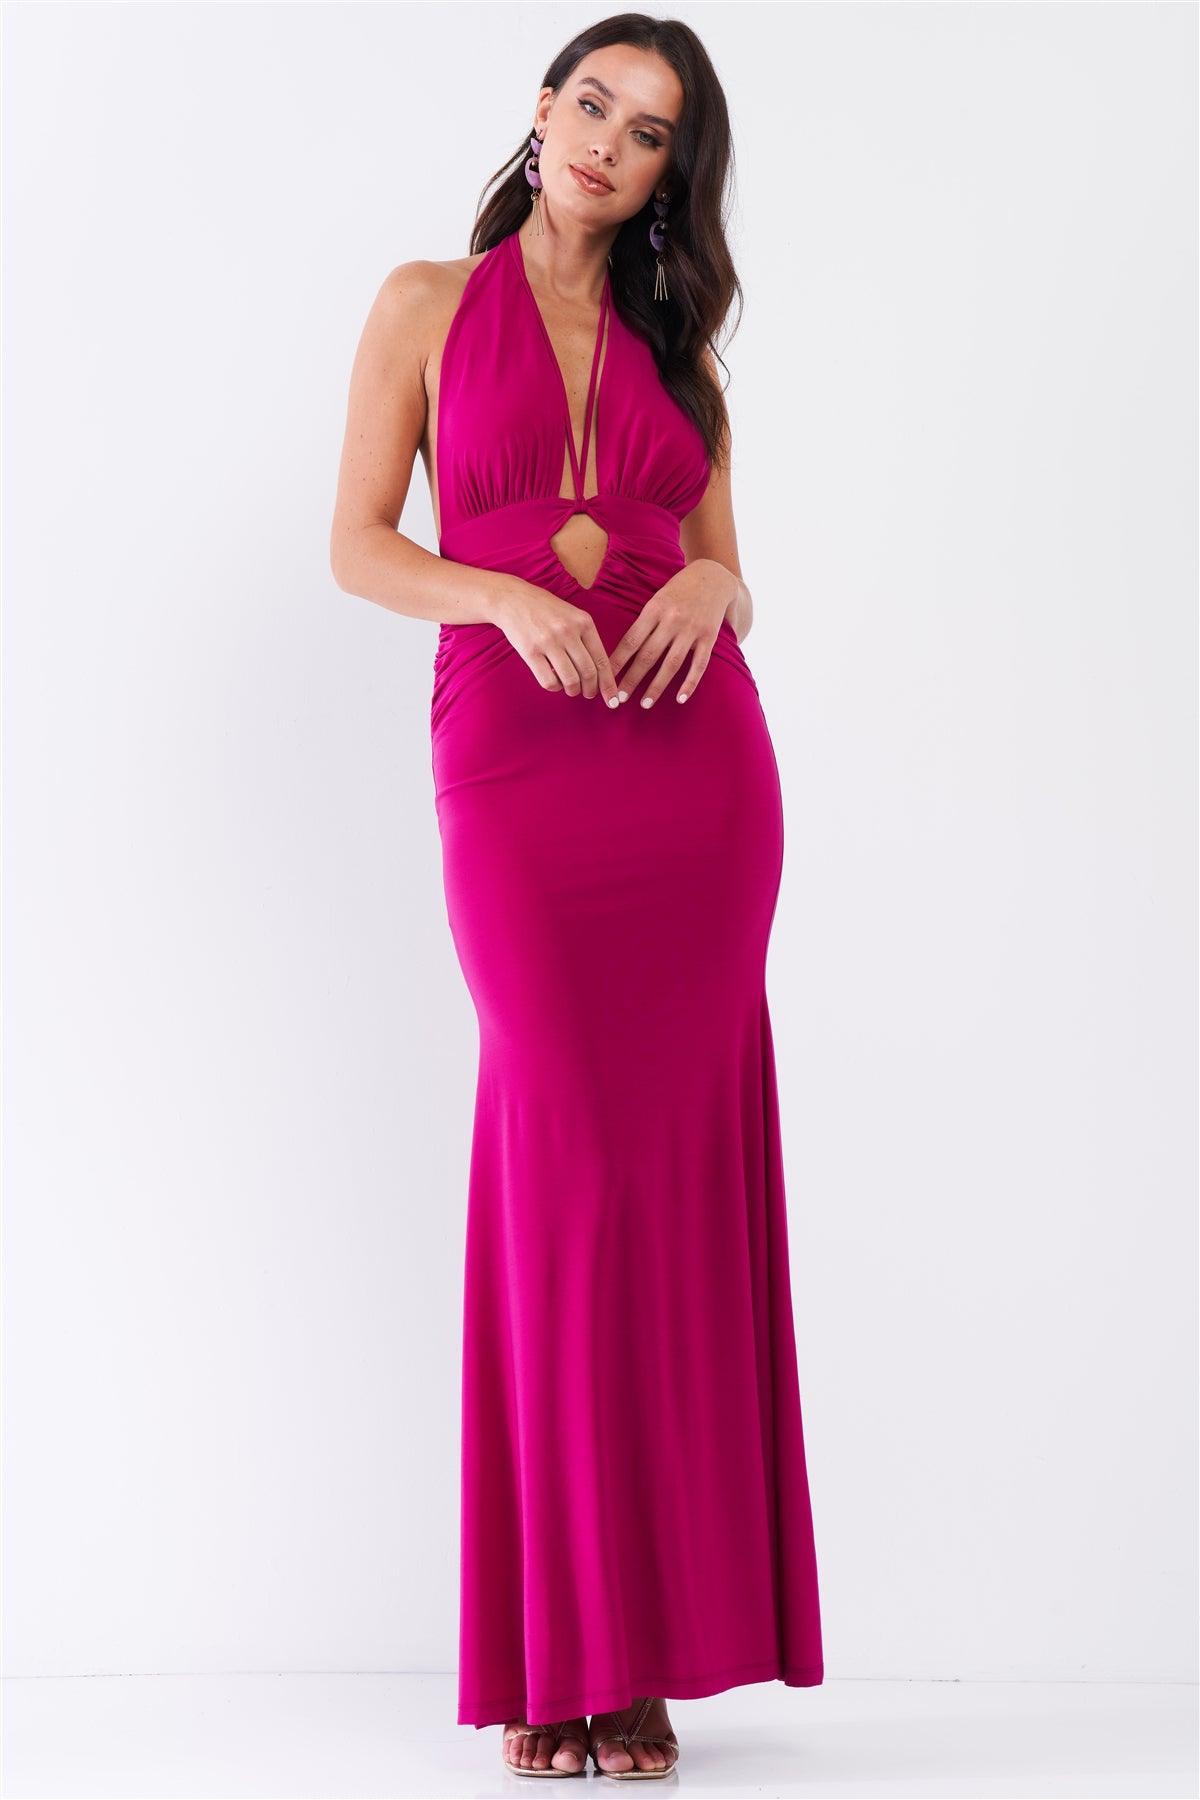 Magenta Halter Neck Front Cut Out Detail Ruched Self-Tie Long Straps Open Back Mermaid Maxi Dress /3-2-1